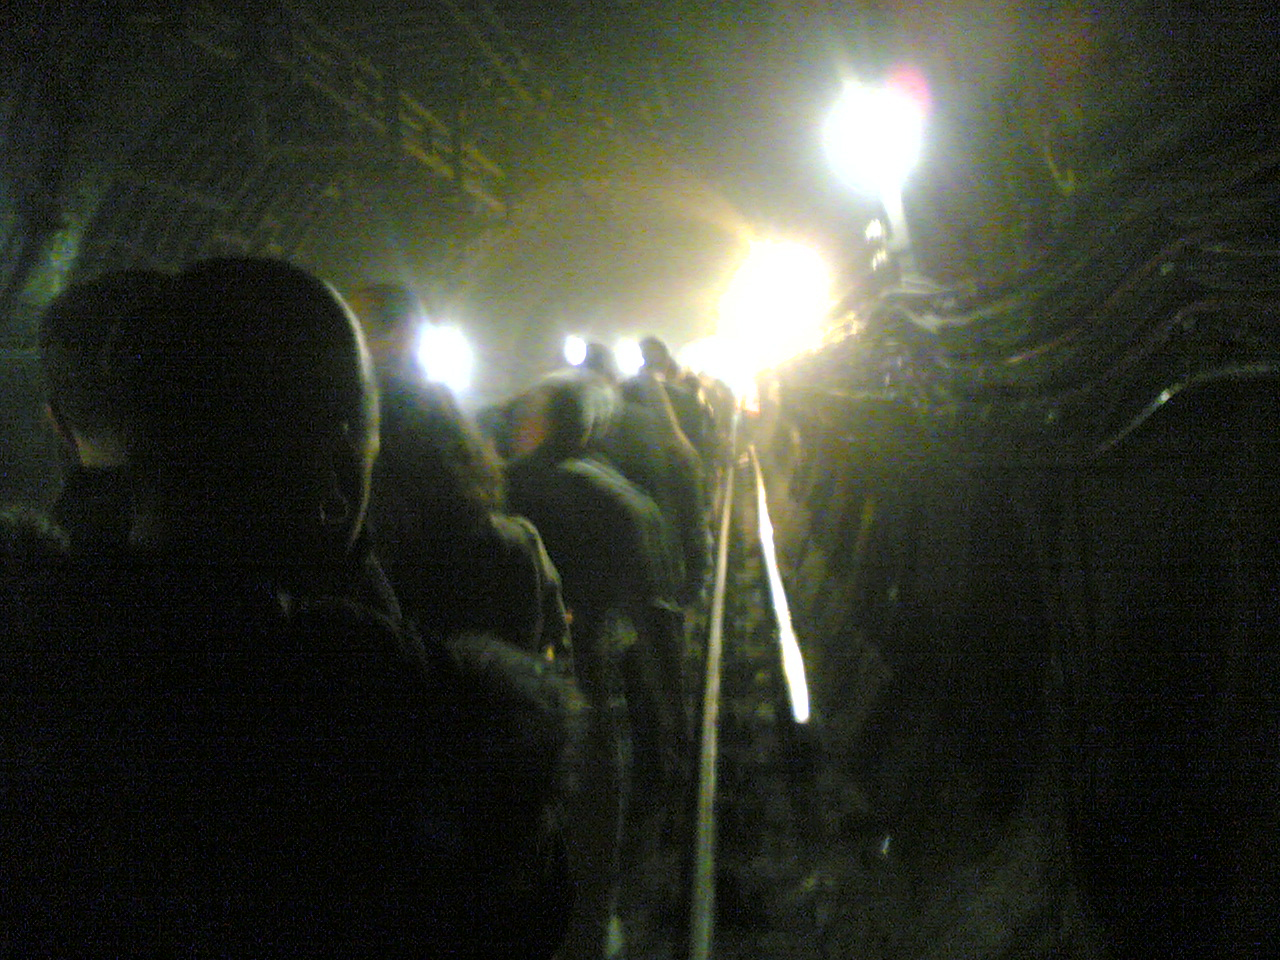 Photograph taken by commuter Alexander Chadwick, taken on his mobile phone camera, shows passengers evacuating from an underground train in a tunnel near Kings Cross station after the London bombings. London. July 7, 2005.